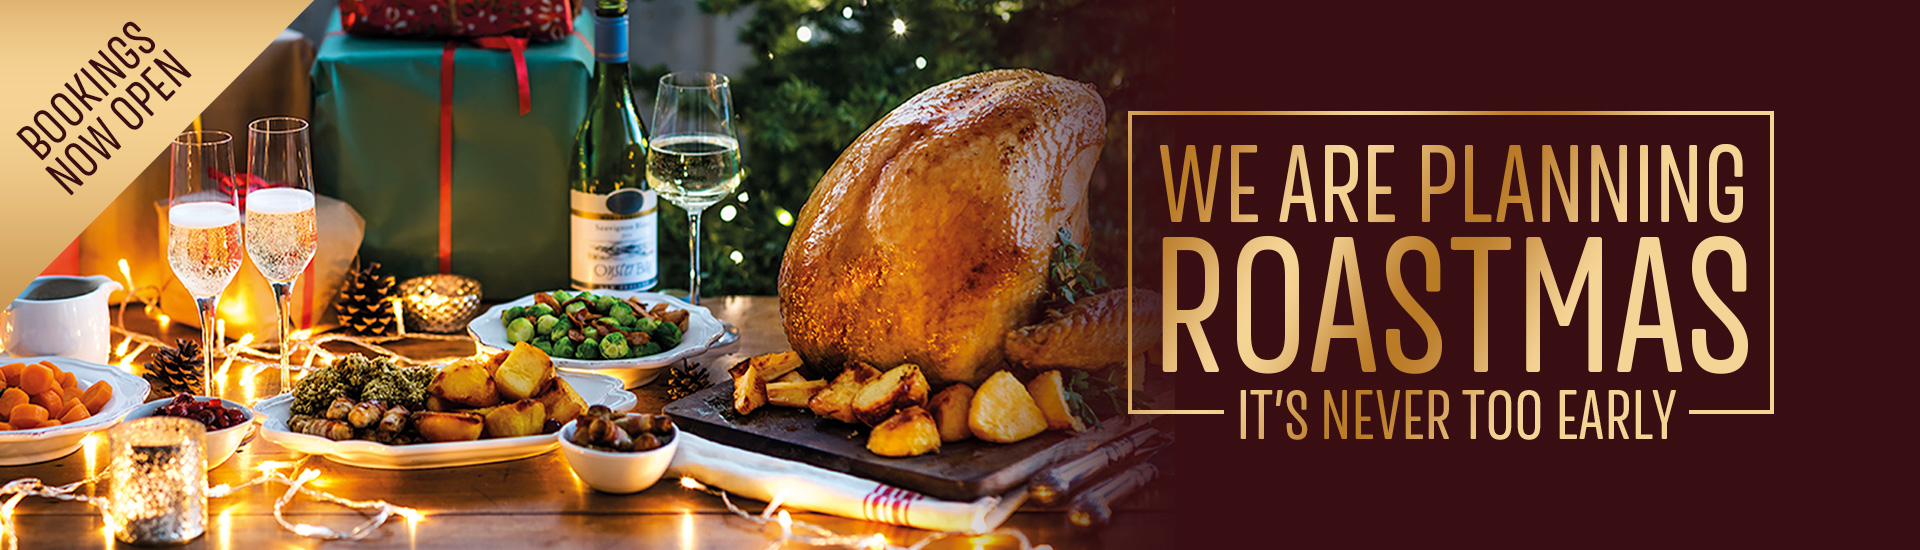 Christmas 2022 at your local Toby Carvery Willerby | Home of the Roast